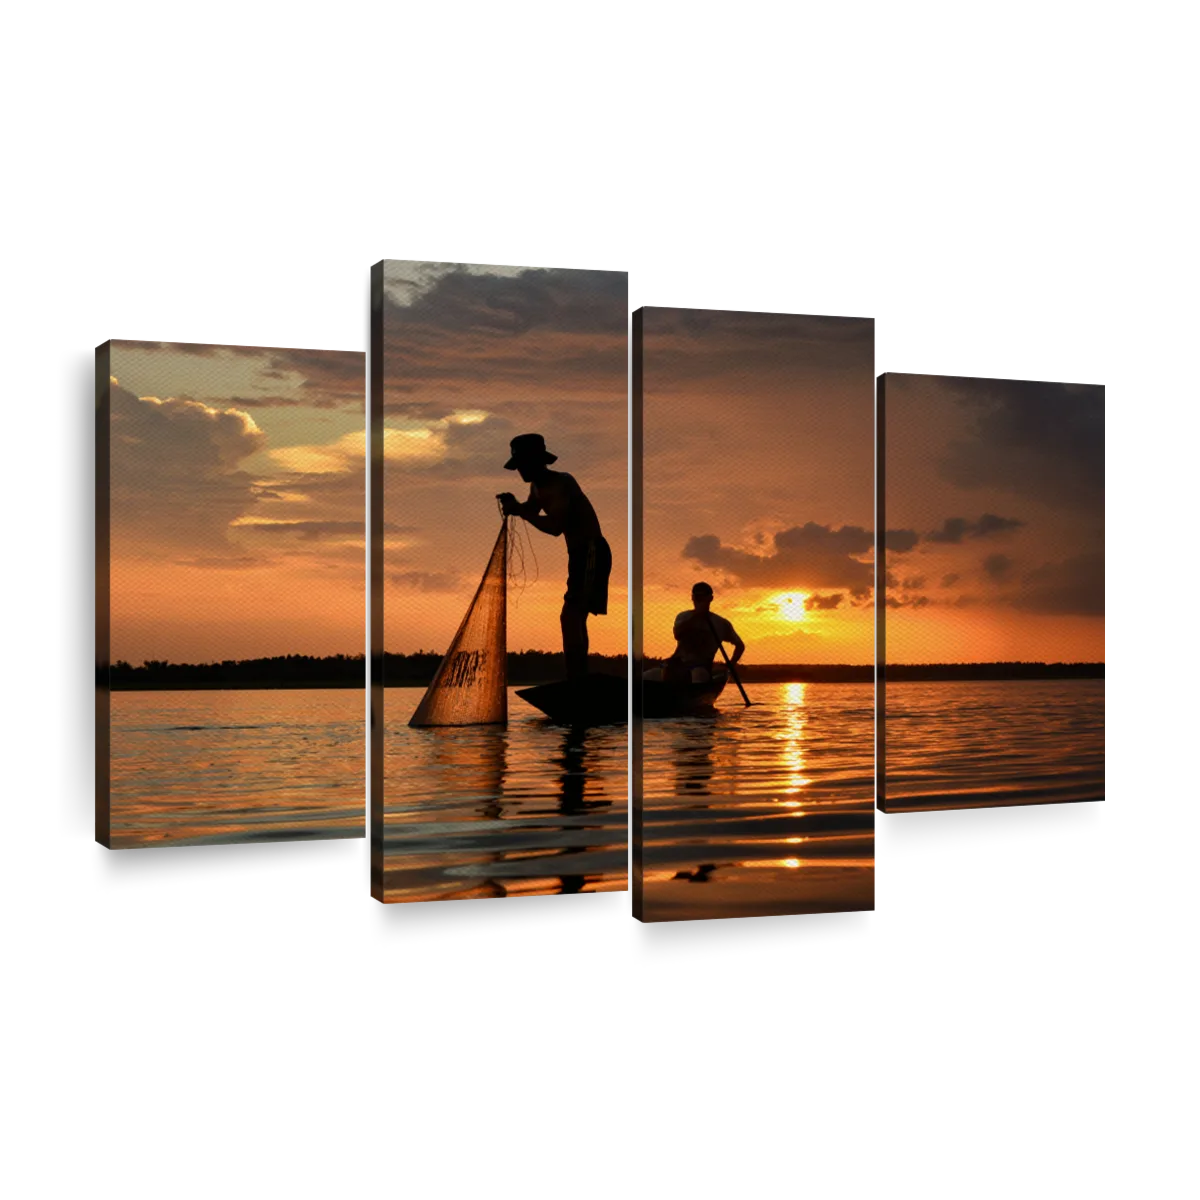 https://cdn.shopify.com/s/files/1/1568/8443/products/1p6_es_2hh_layout_4_mess_daybreak-fishing-4-piece-wall-art.webp?v=1668591714